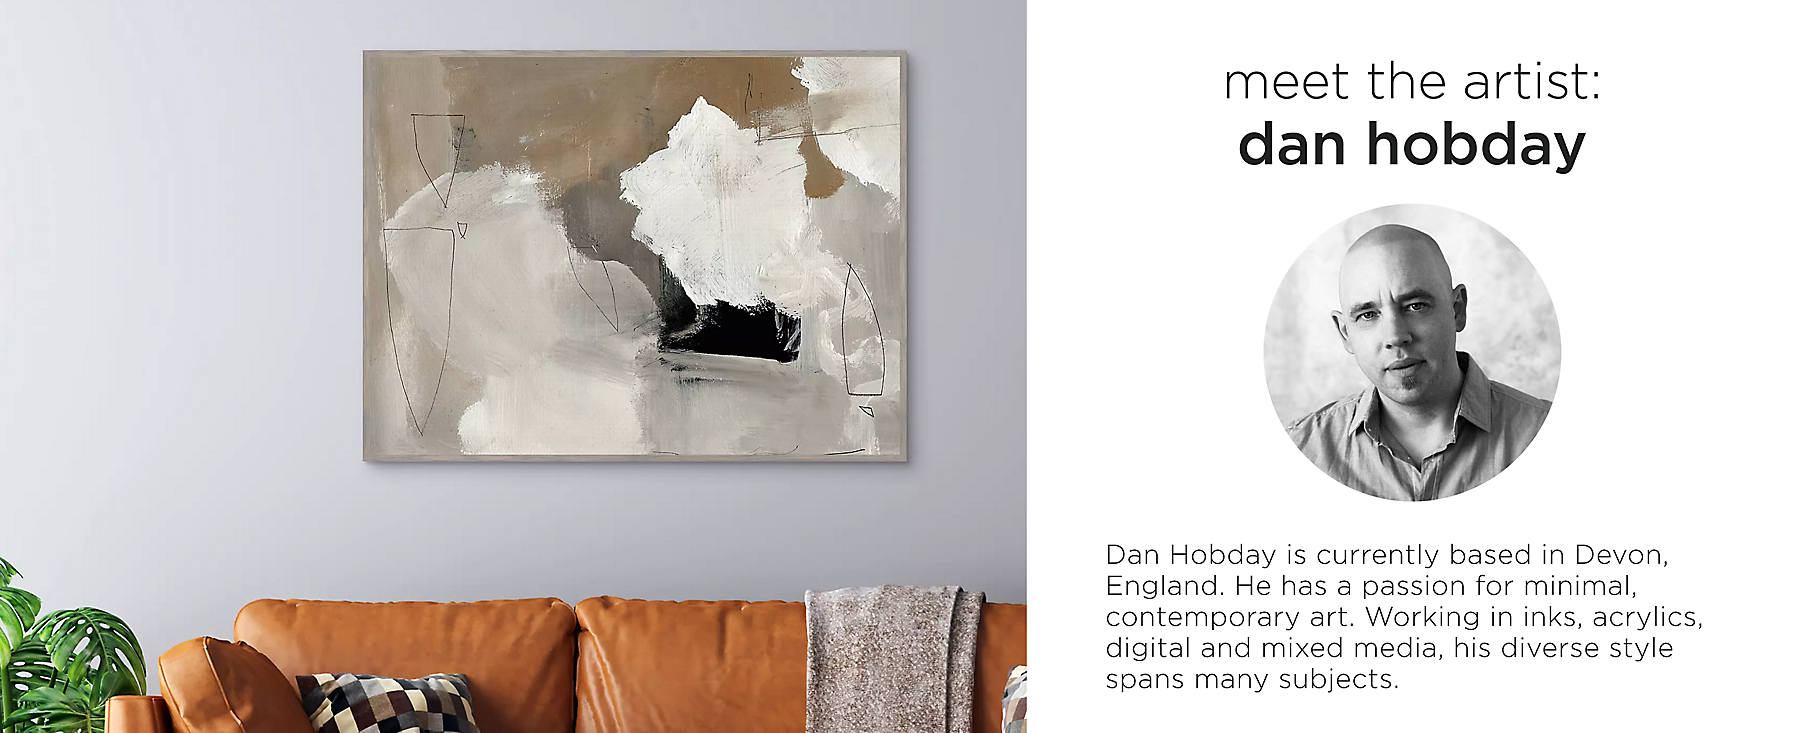 Meet the artist: Dan Hobday is currently based in Devon, England. He has a passion for minimal, contemporary art. Working in inks, acrylics, digital and mixed media, his diverse style spans many subjects.